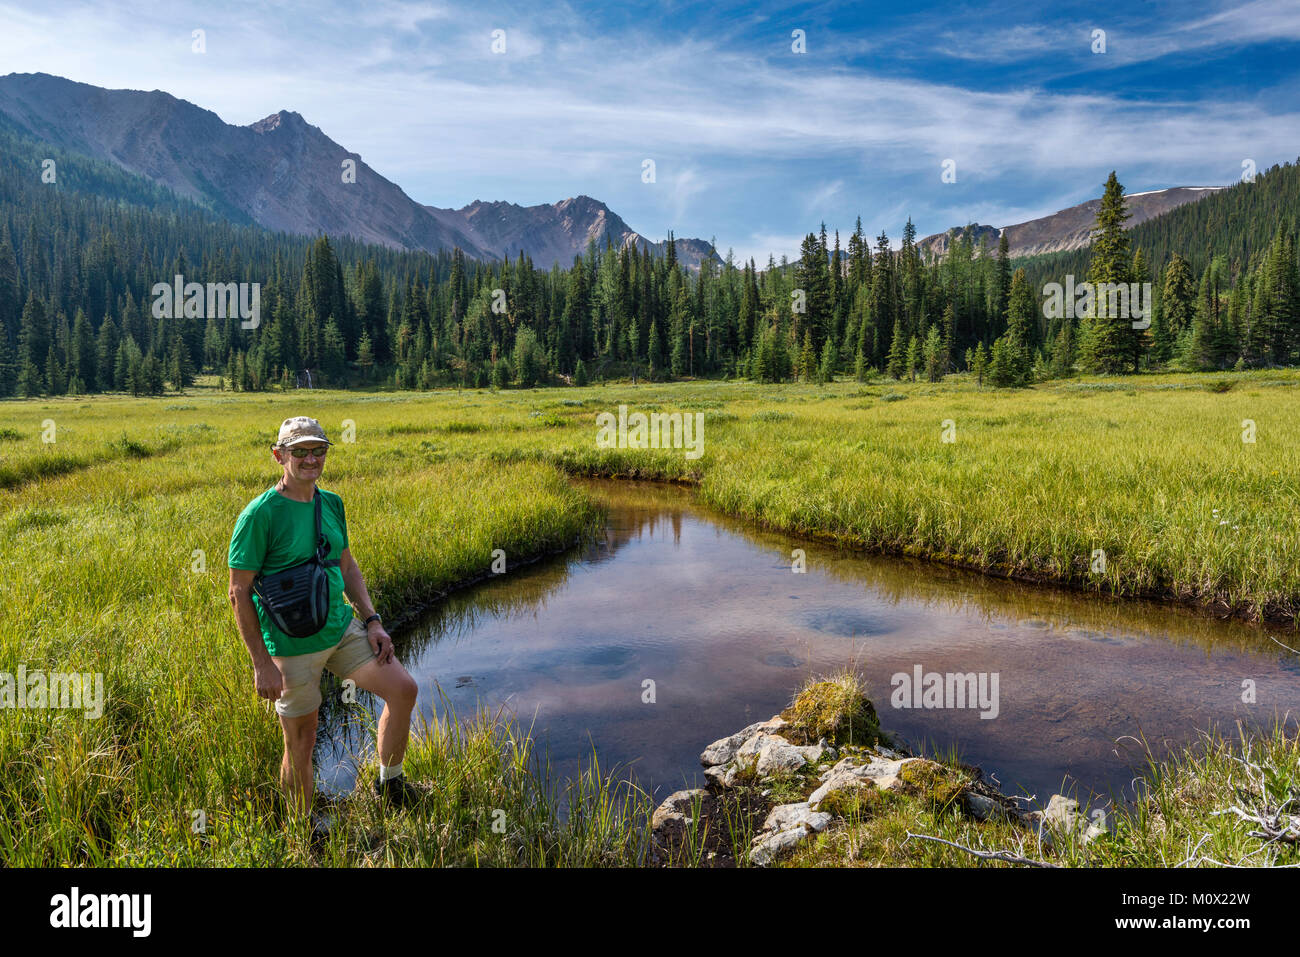 Middle aged hiker in Brewer Creek Valley, Purcell Mountains, Kootenay Rockies, near Invermere, East Kootenay Region, British Columbia, Canada Stock Photo